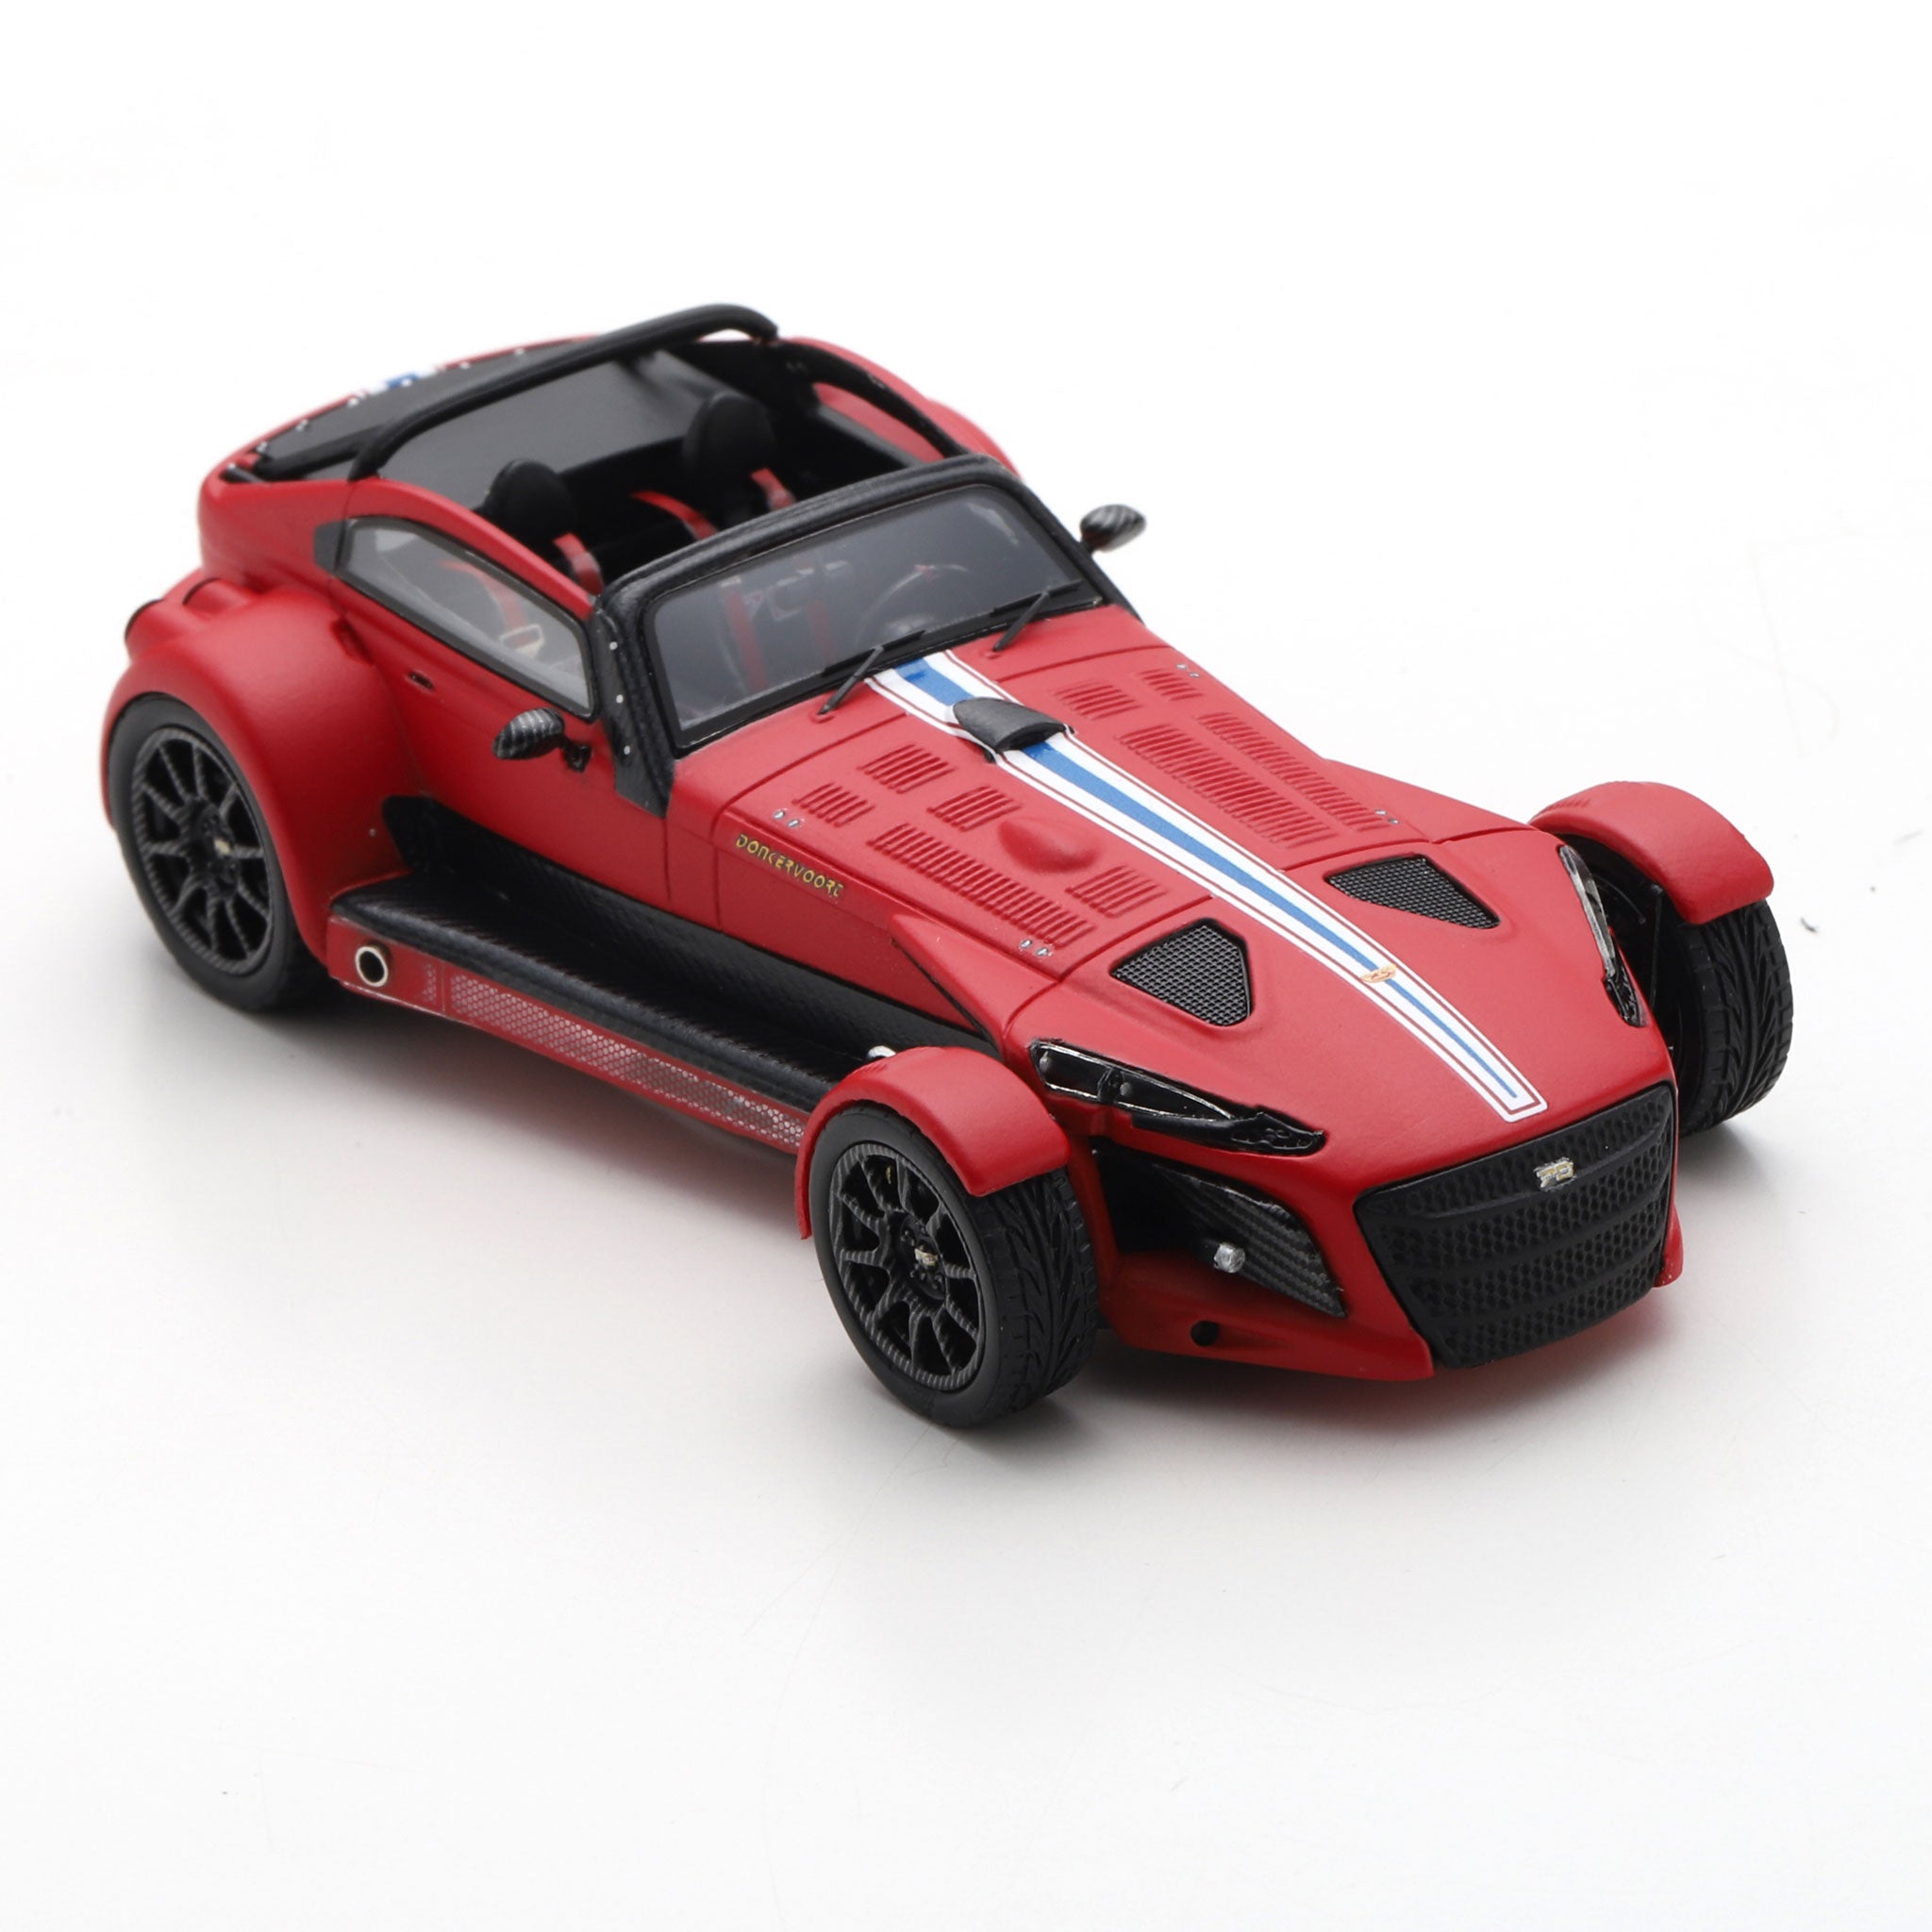 Donkervoort D8 GTO-JD70 R 1:43 // Red